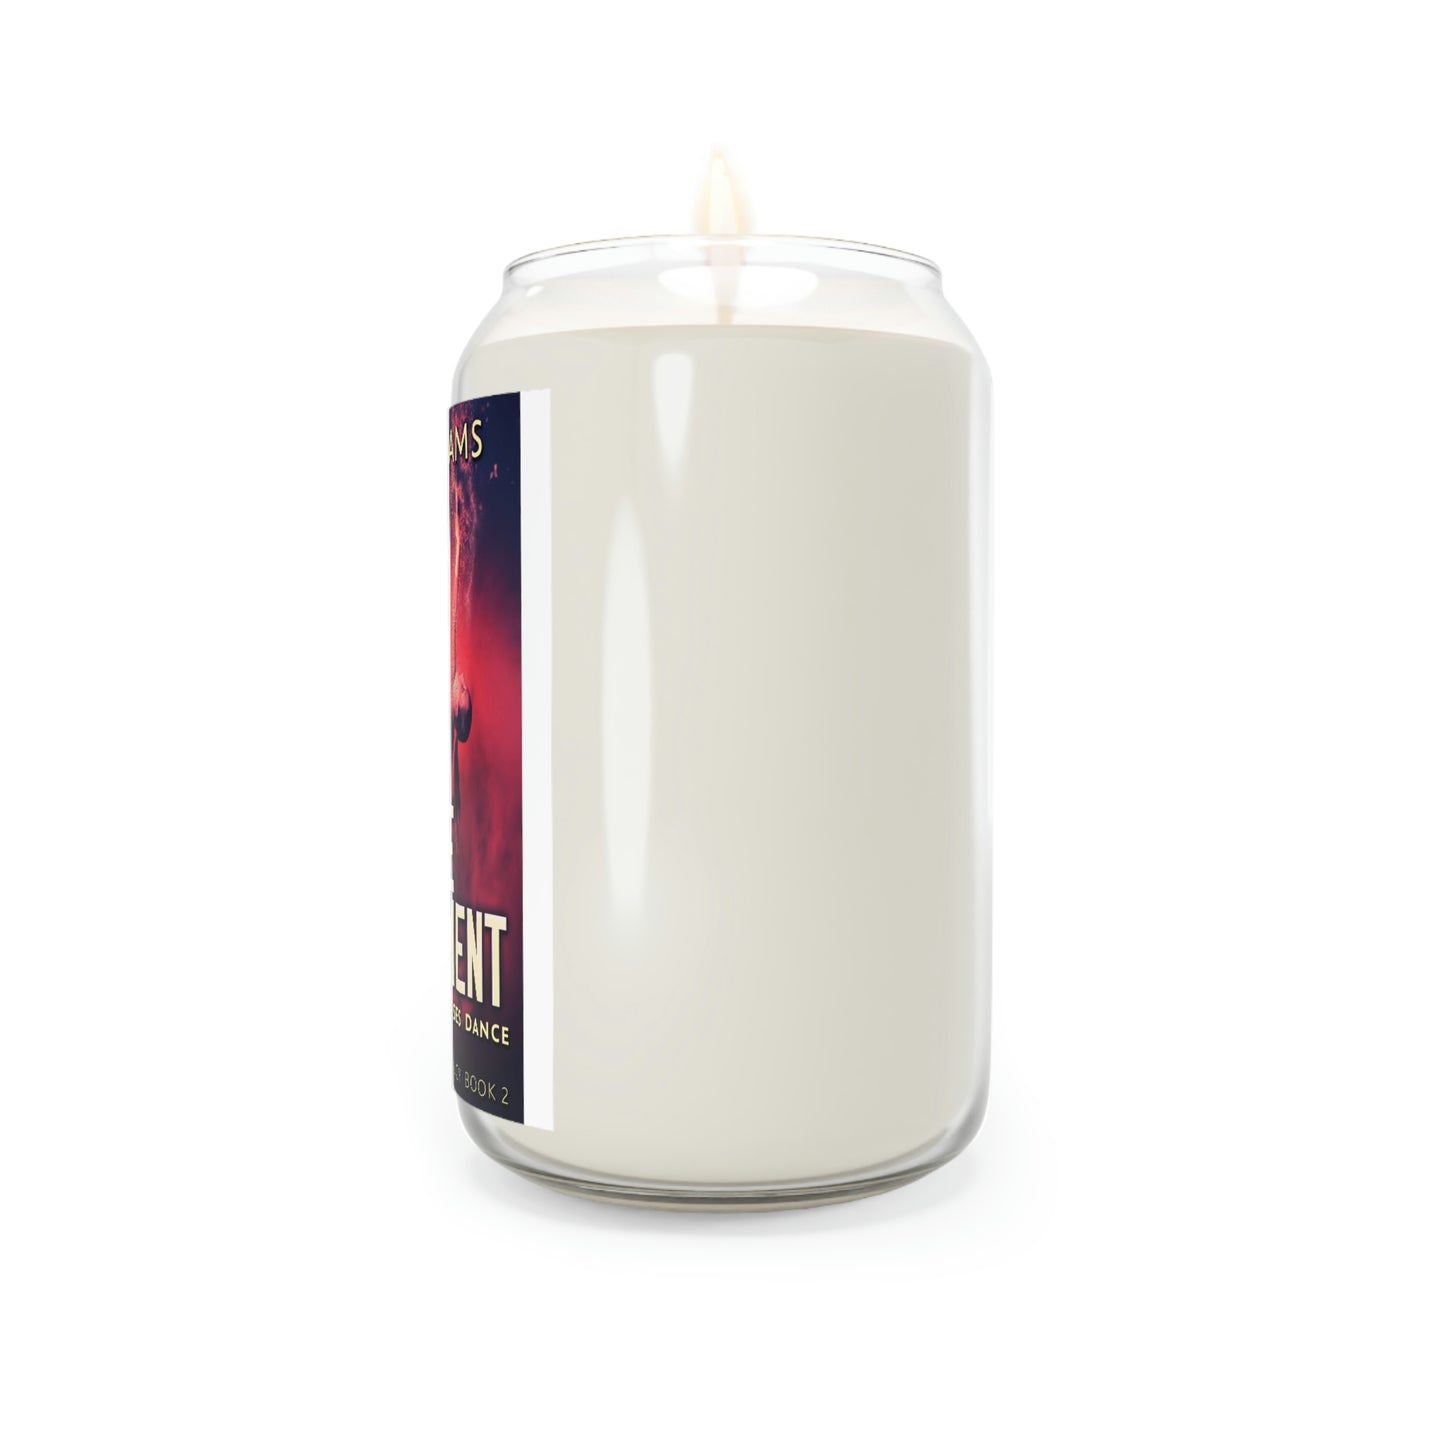 Rite Judgement - Scented Candle